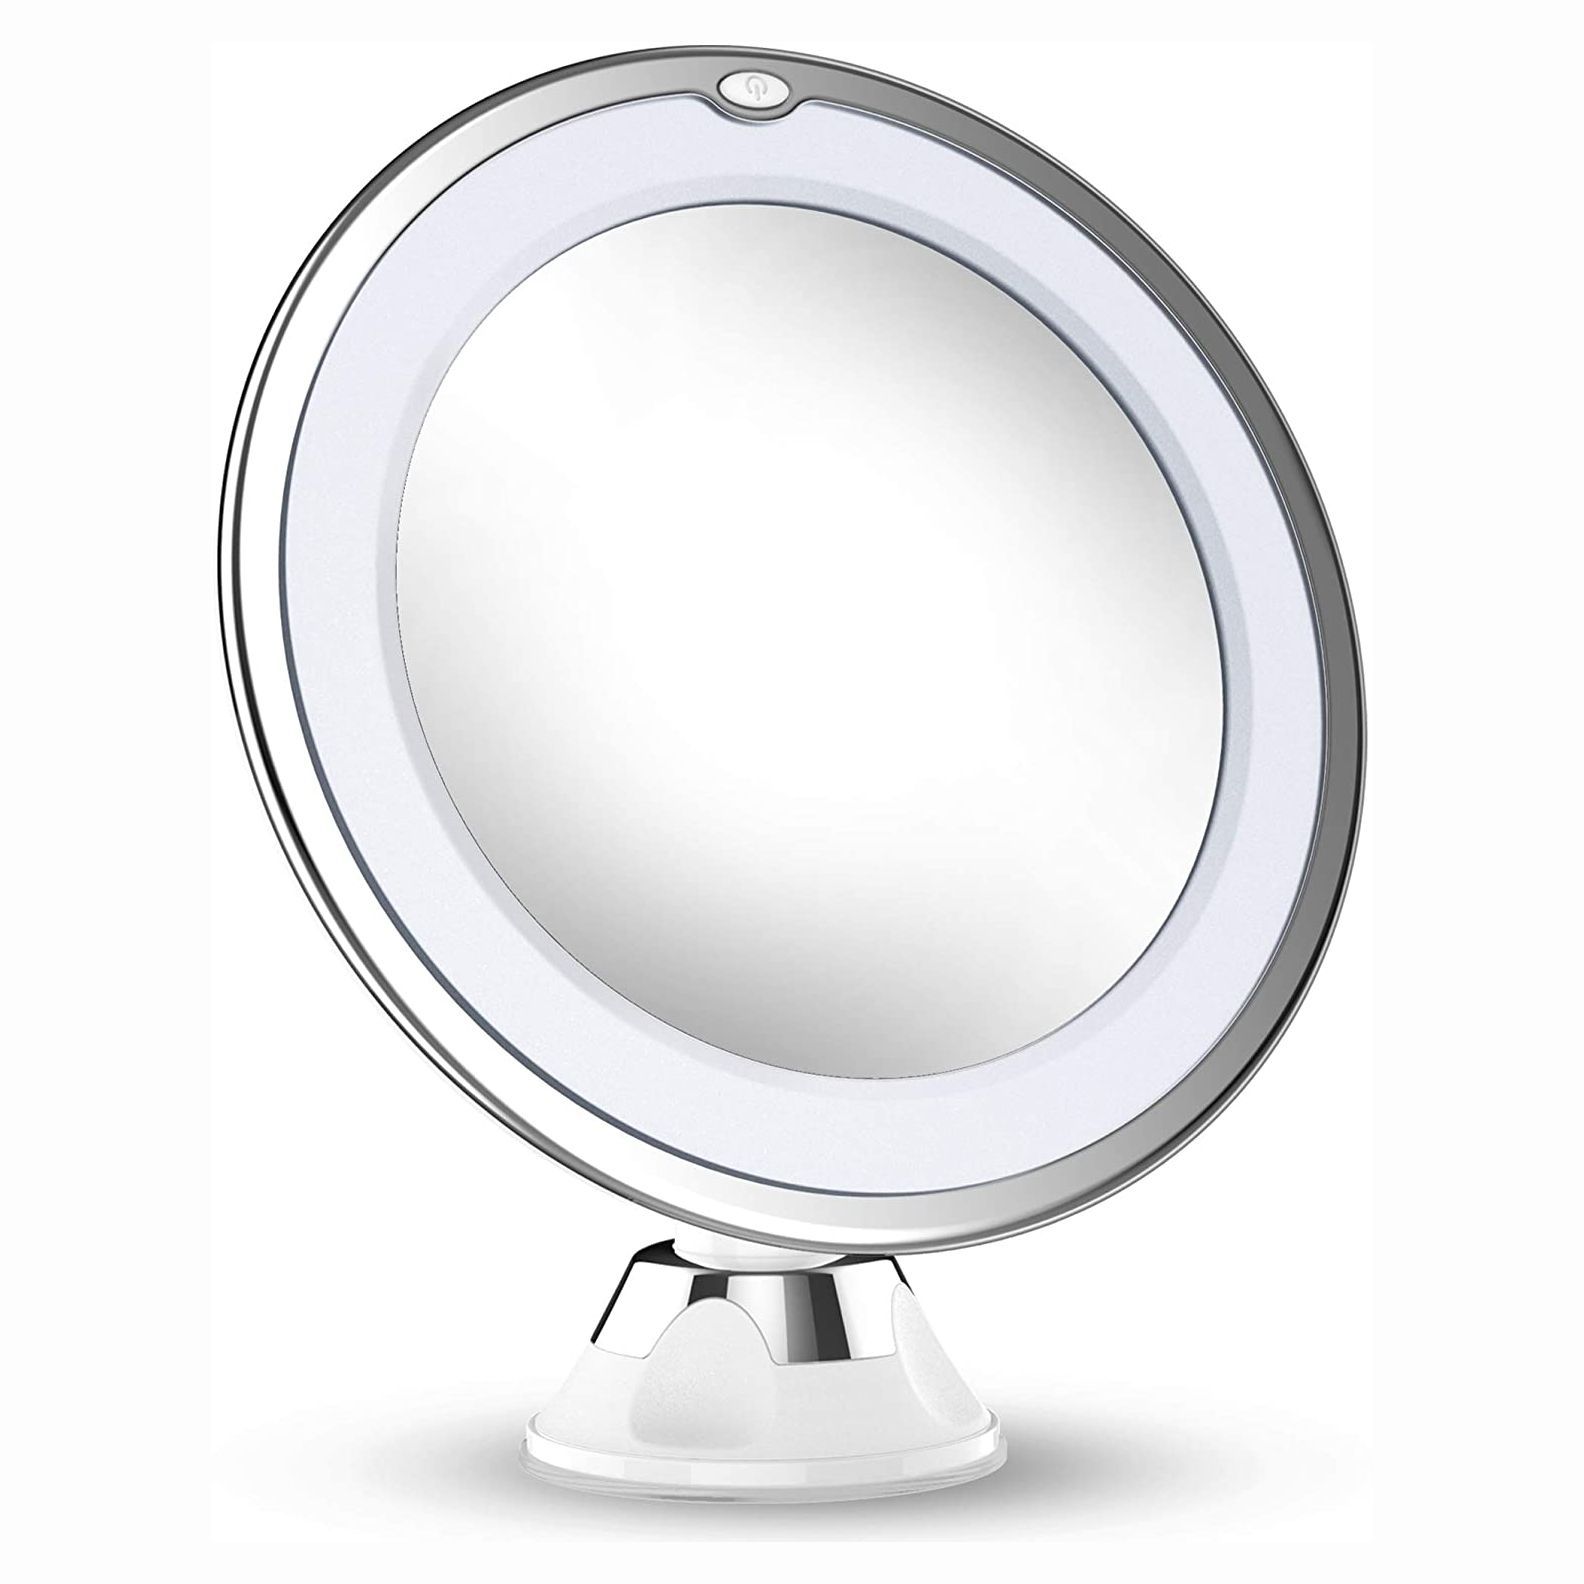 10X Magnifying Mirror with Lights 2018 Upgraded 7-Inch LED Lighted Vanity Mirror for Makeup Shaving with in Bathroom 360° Rotation Portable Illuminated 